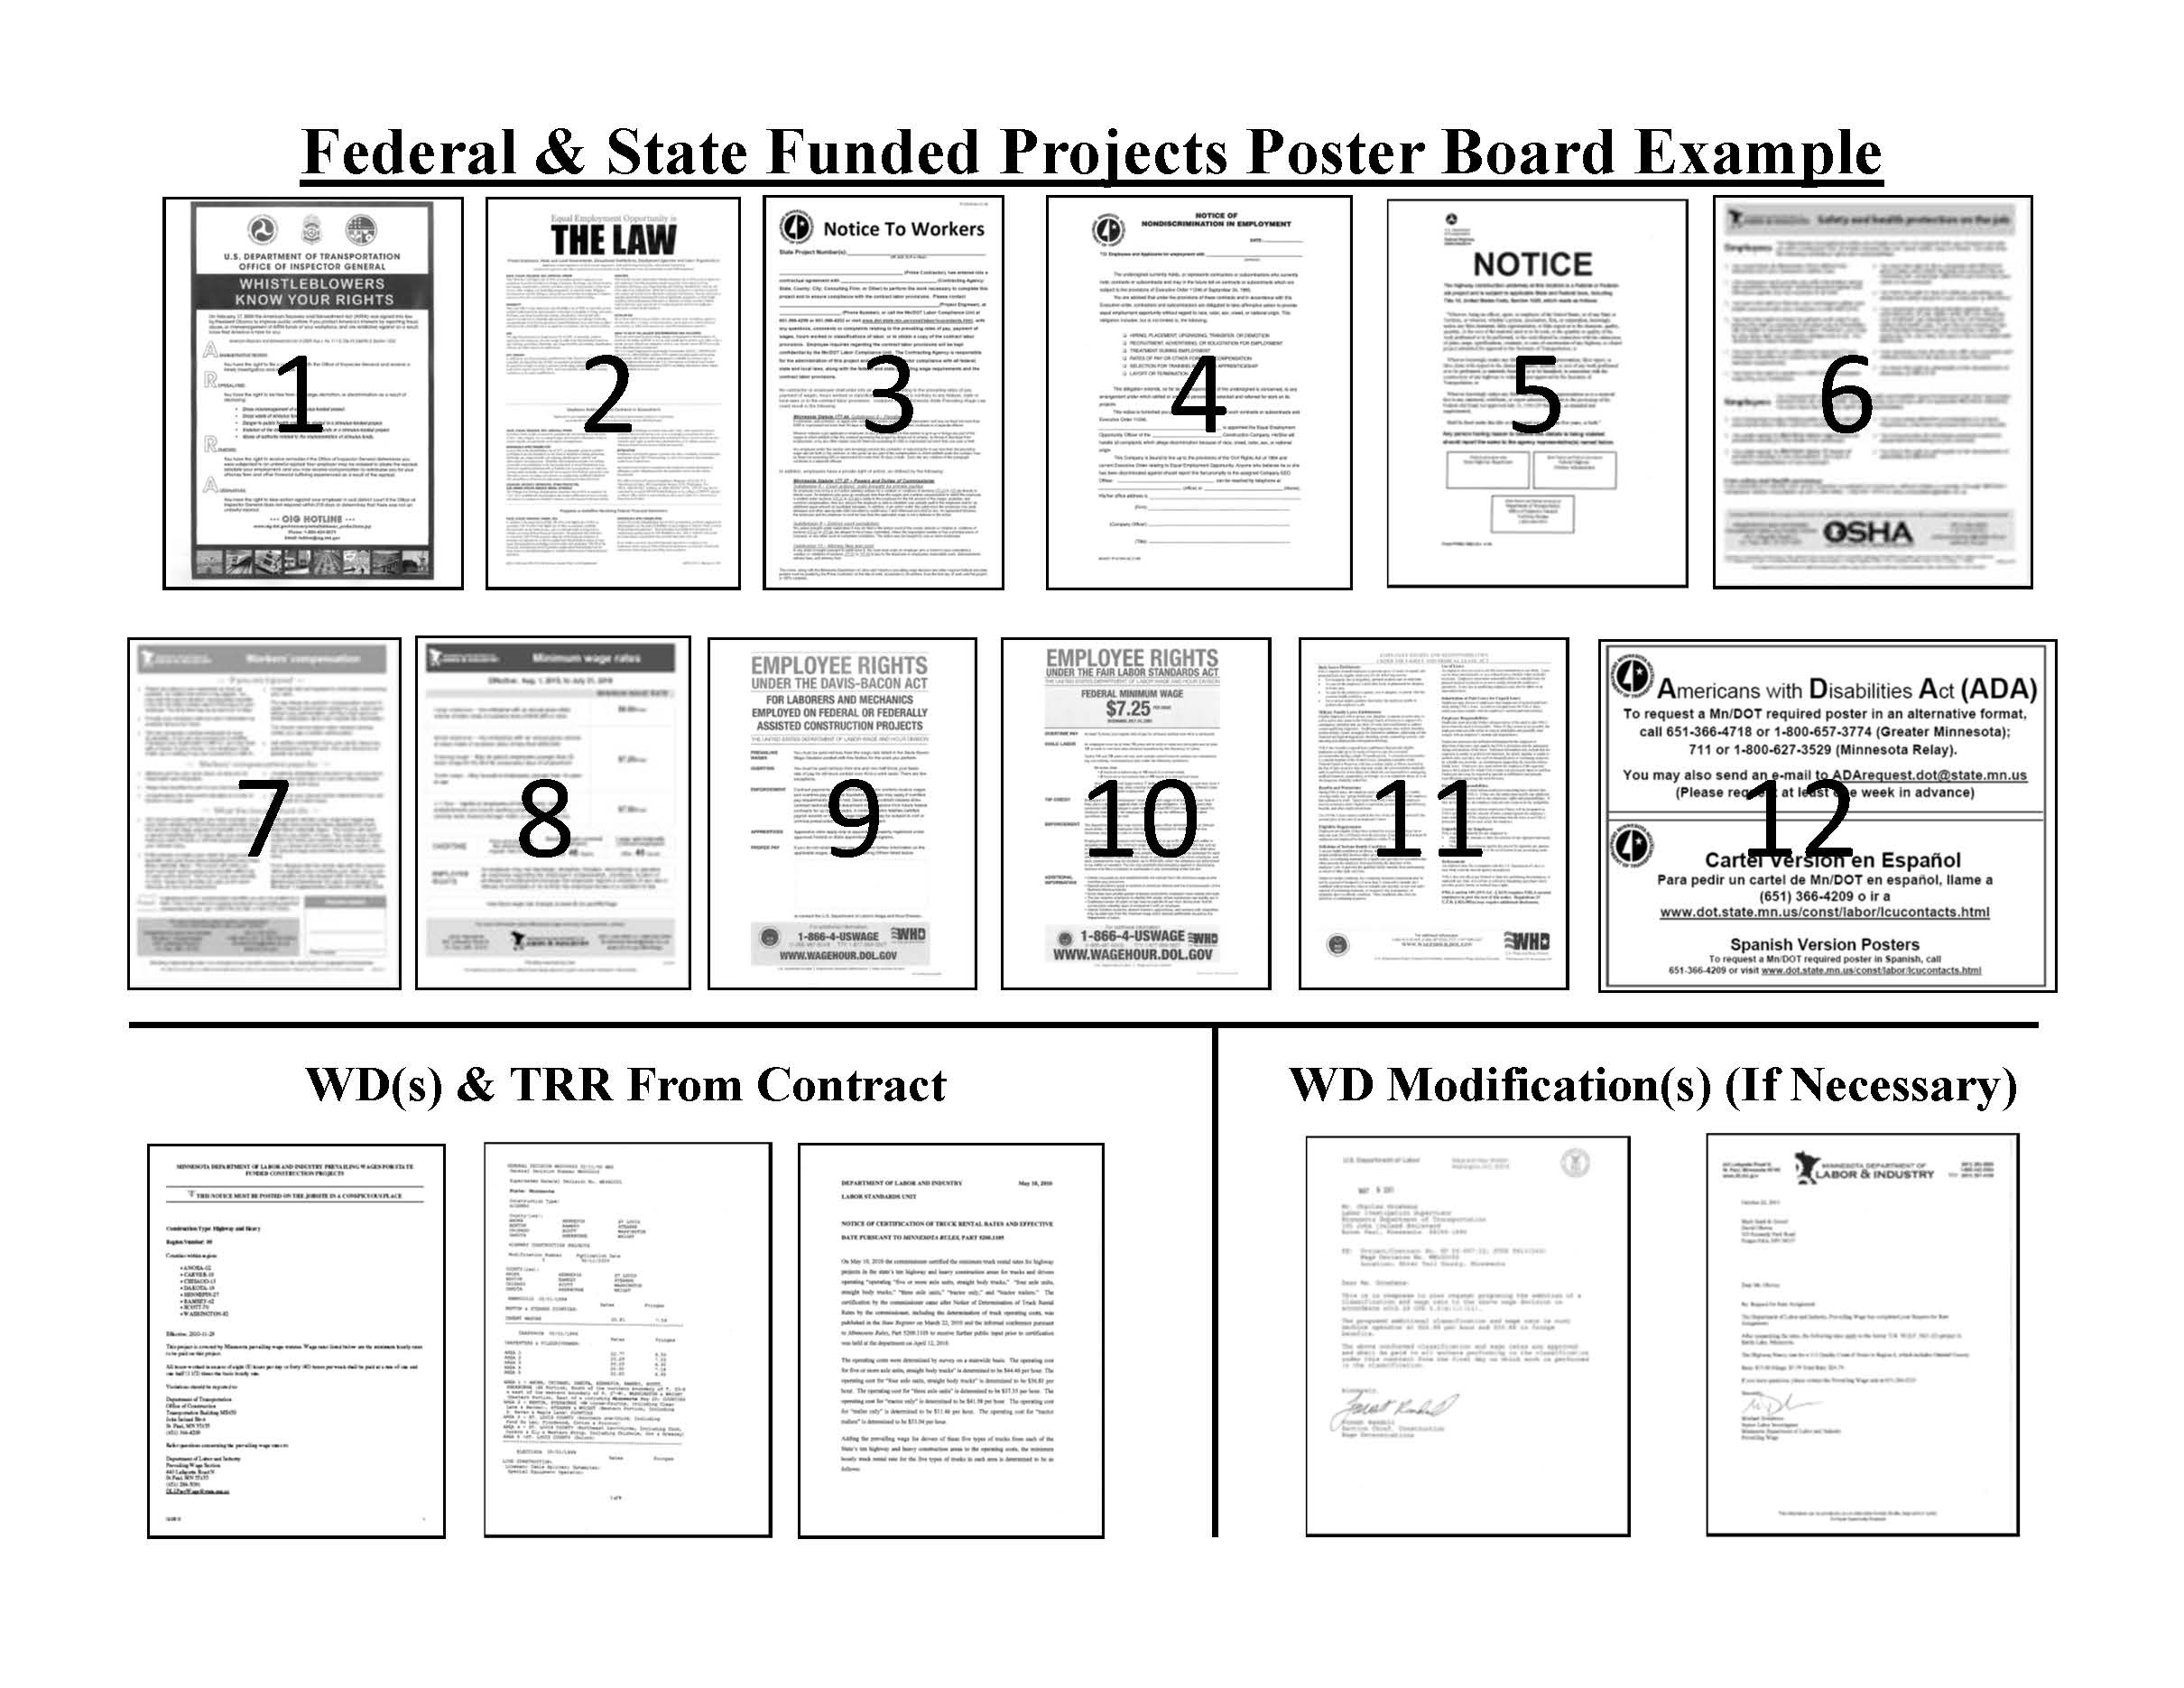 An image showing poster boards including posters such as whistleblowers, the law, notice to workers, employee rights, Americans with Disabilities Act.